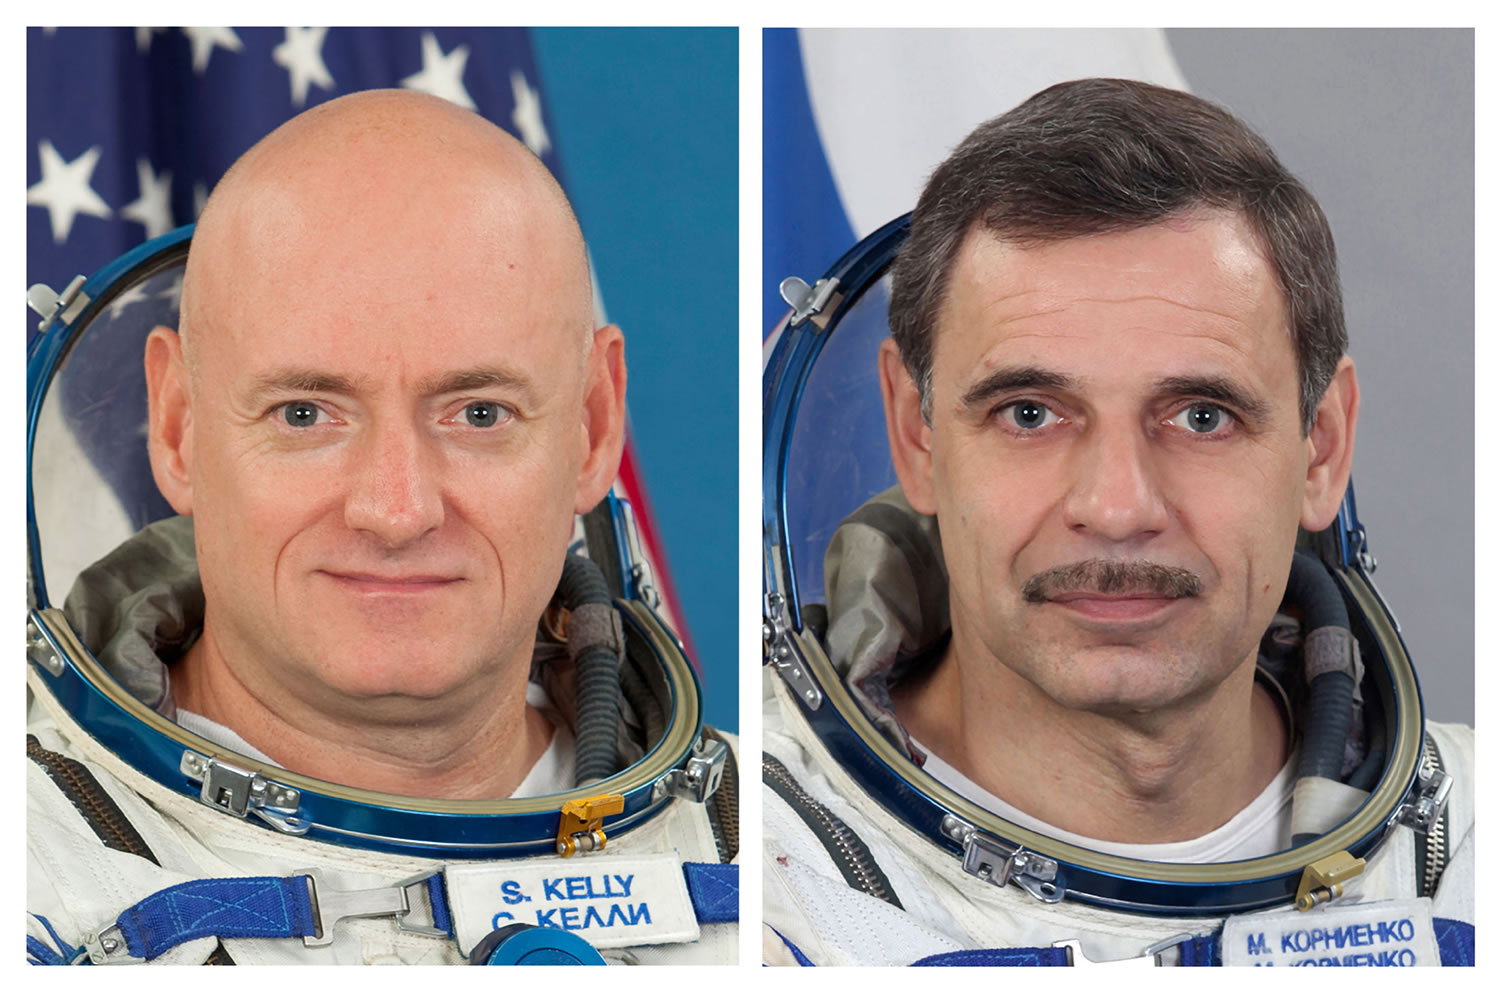 Gagarin Cosmonaut Training Center
U.S. astronaut Scott Kelly and Russian cosmonaut Mikhail Kornienko anticipate many scientific gains from their year-long mission aboard the International Space Station.